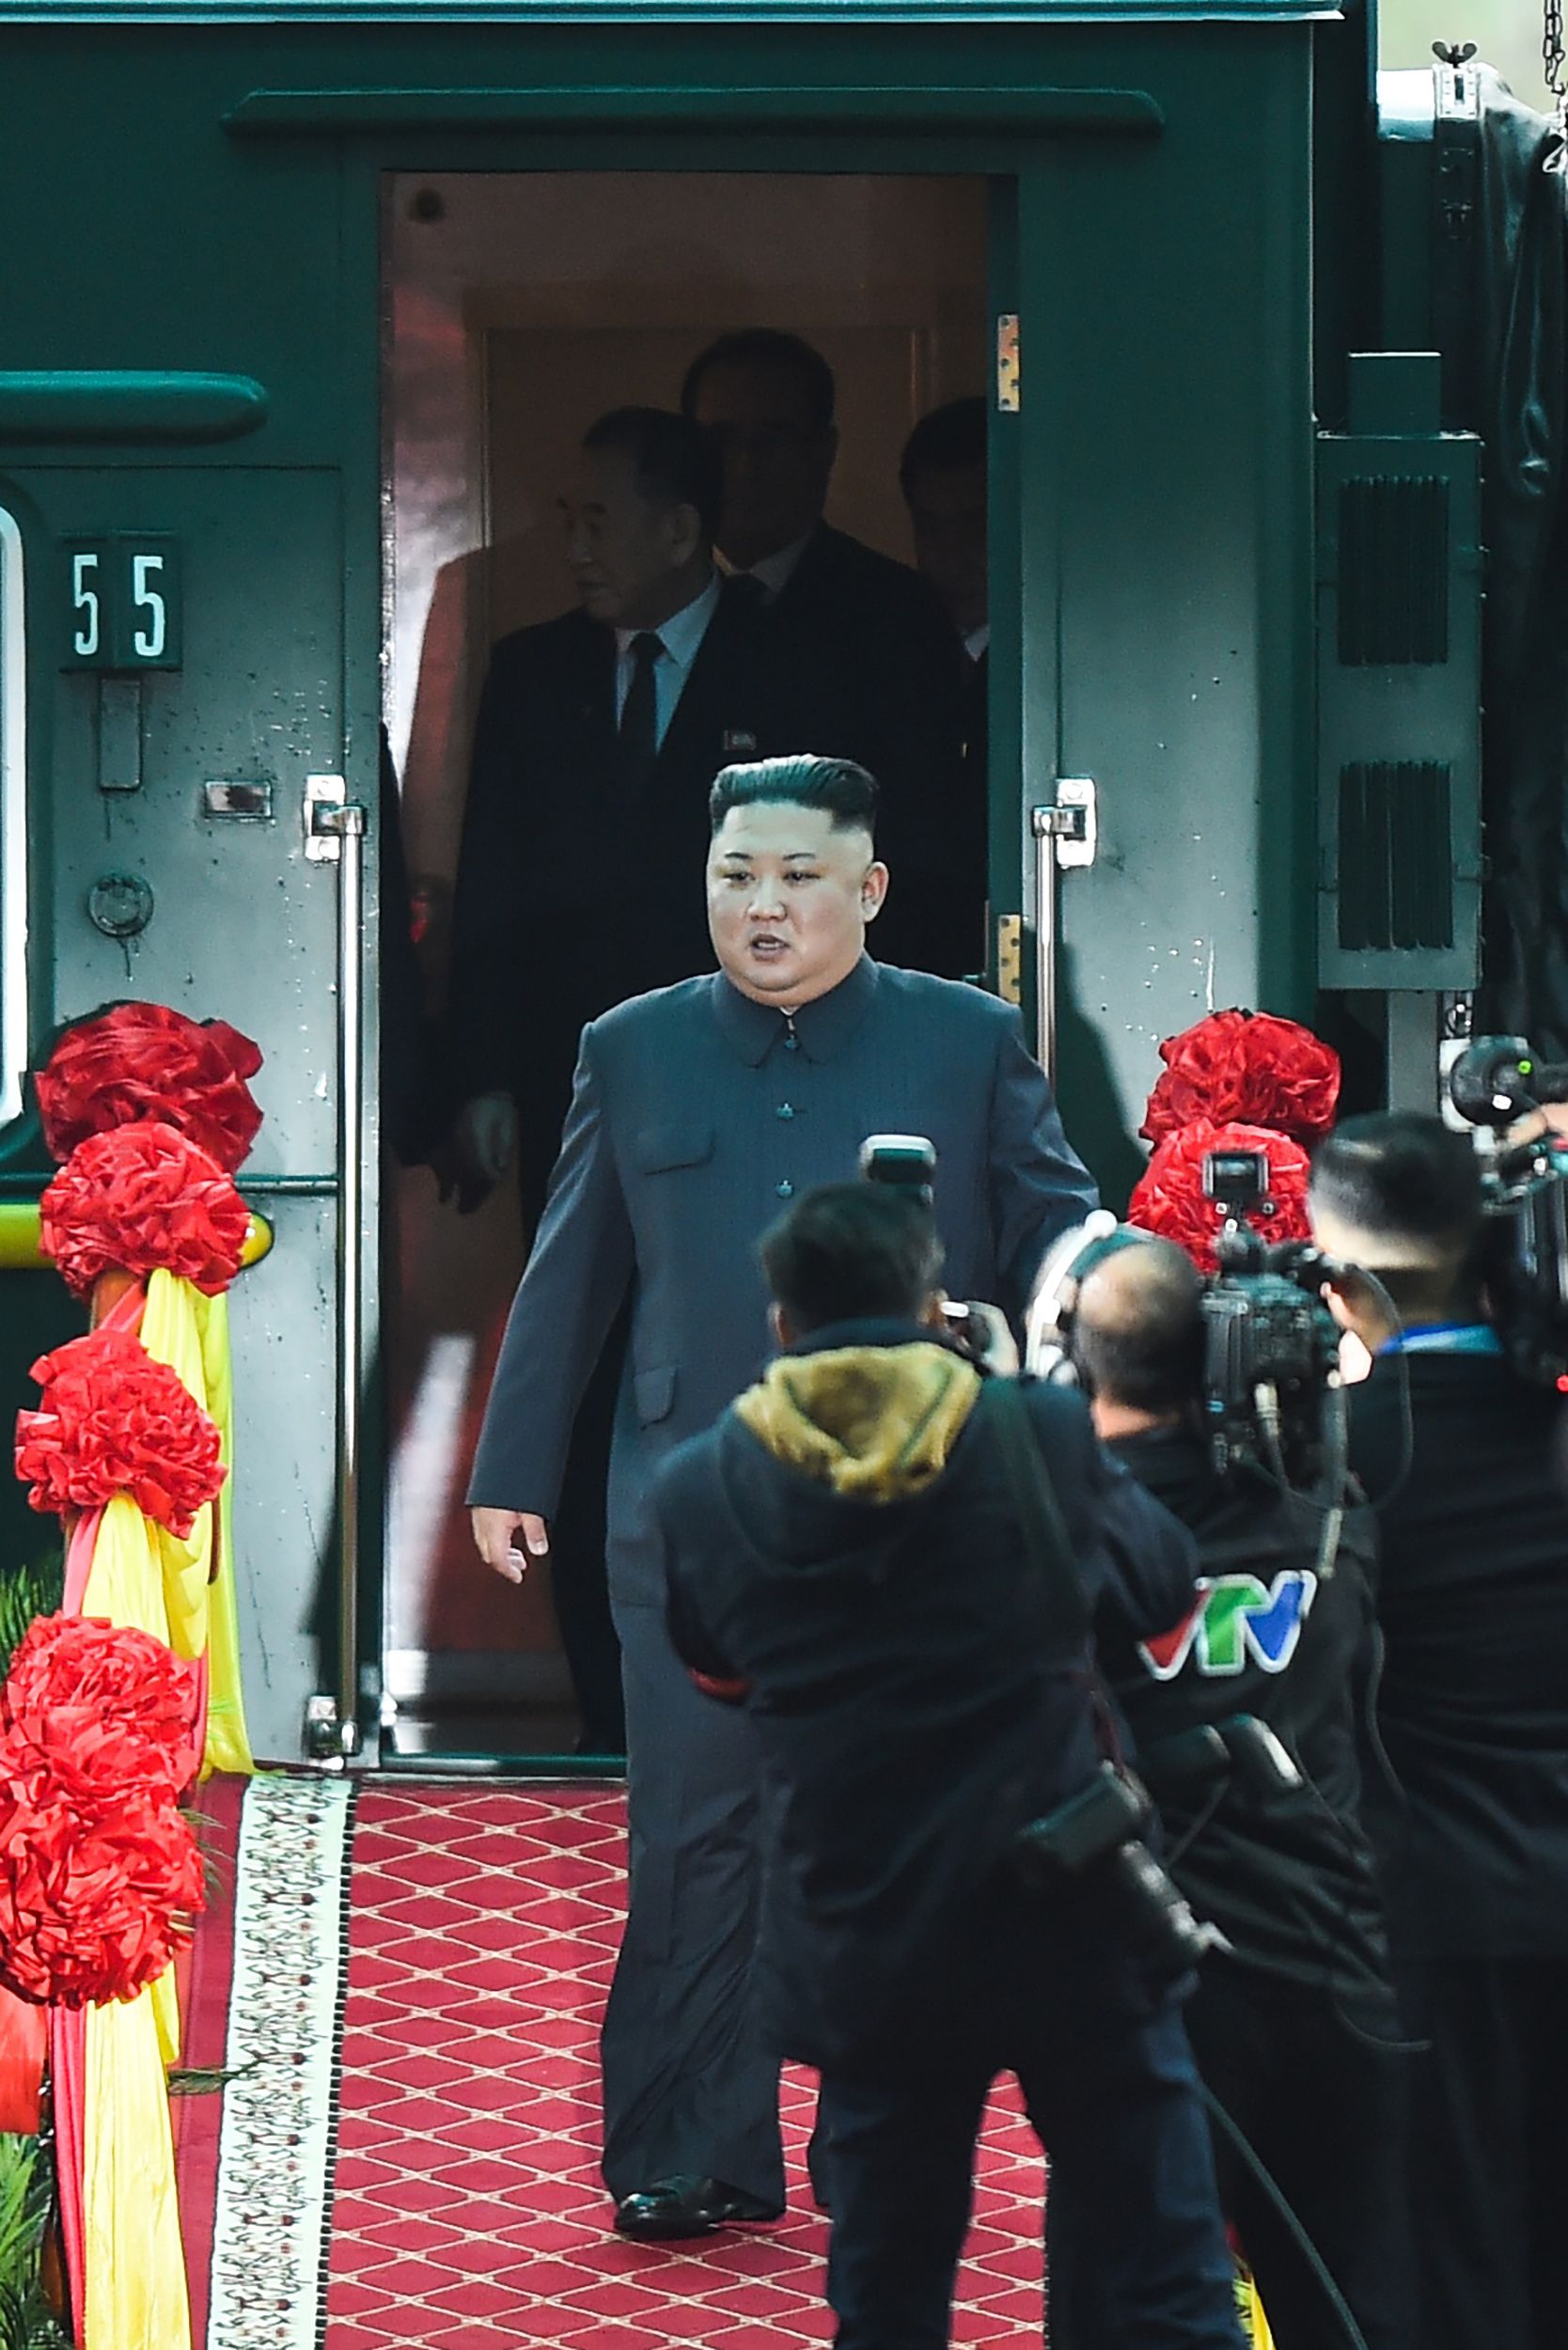 PHOTO: North Korea's leader Kim Jong Un arrives at the Dong Dang railway station in Dong Dang, Vietnam, Feb. 26, 2019, to attend the second US-North Korea Summit. 